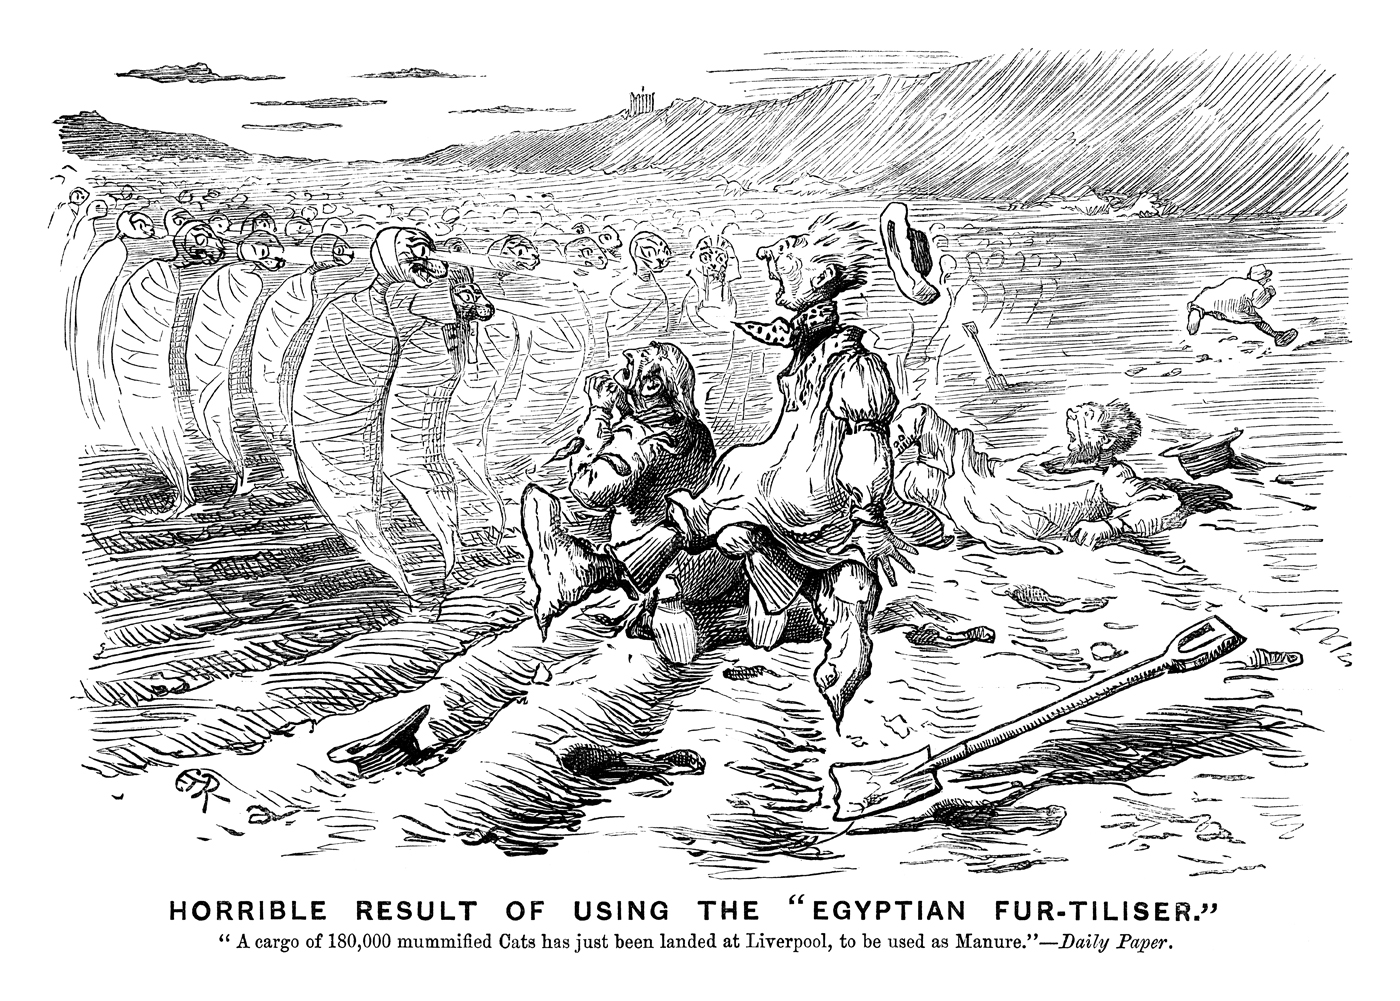 Horrible Result of Using the 'Egyptian Fur-tiliser.’ "A cargo of 180,000 mummified cats has just been landed at Liverpool, to be used as manure." - Daily Paper. Published in Punch 15 February 1890. By E T Reed © Punch Ltd